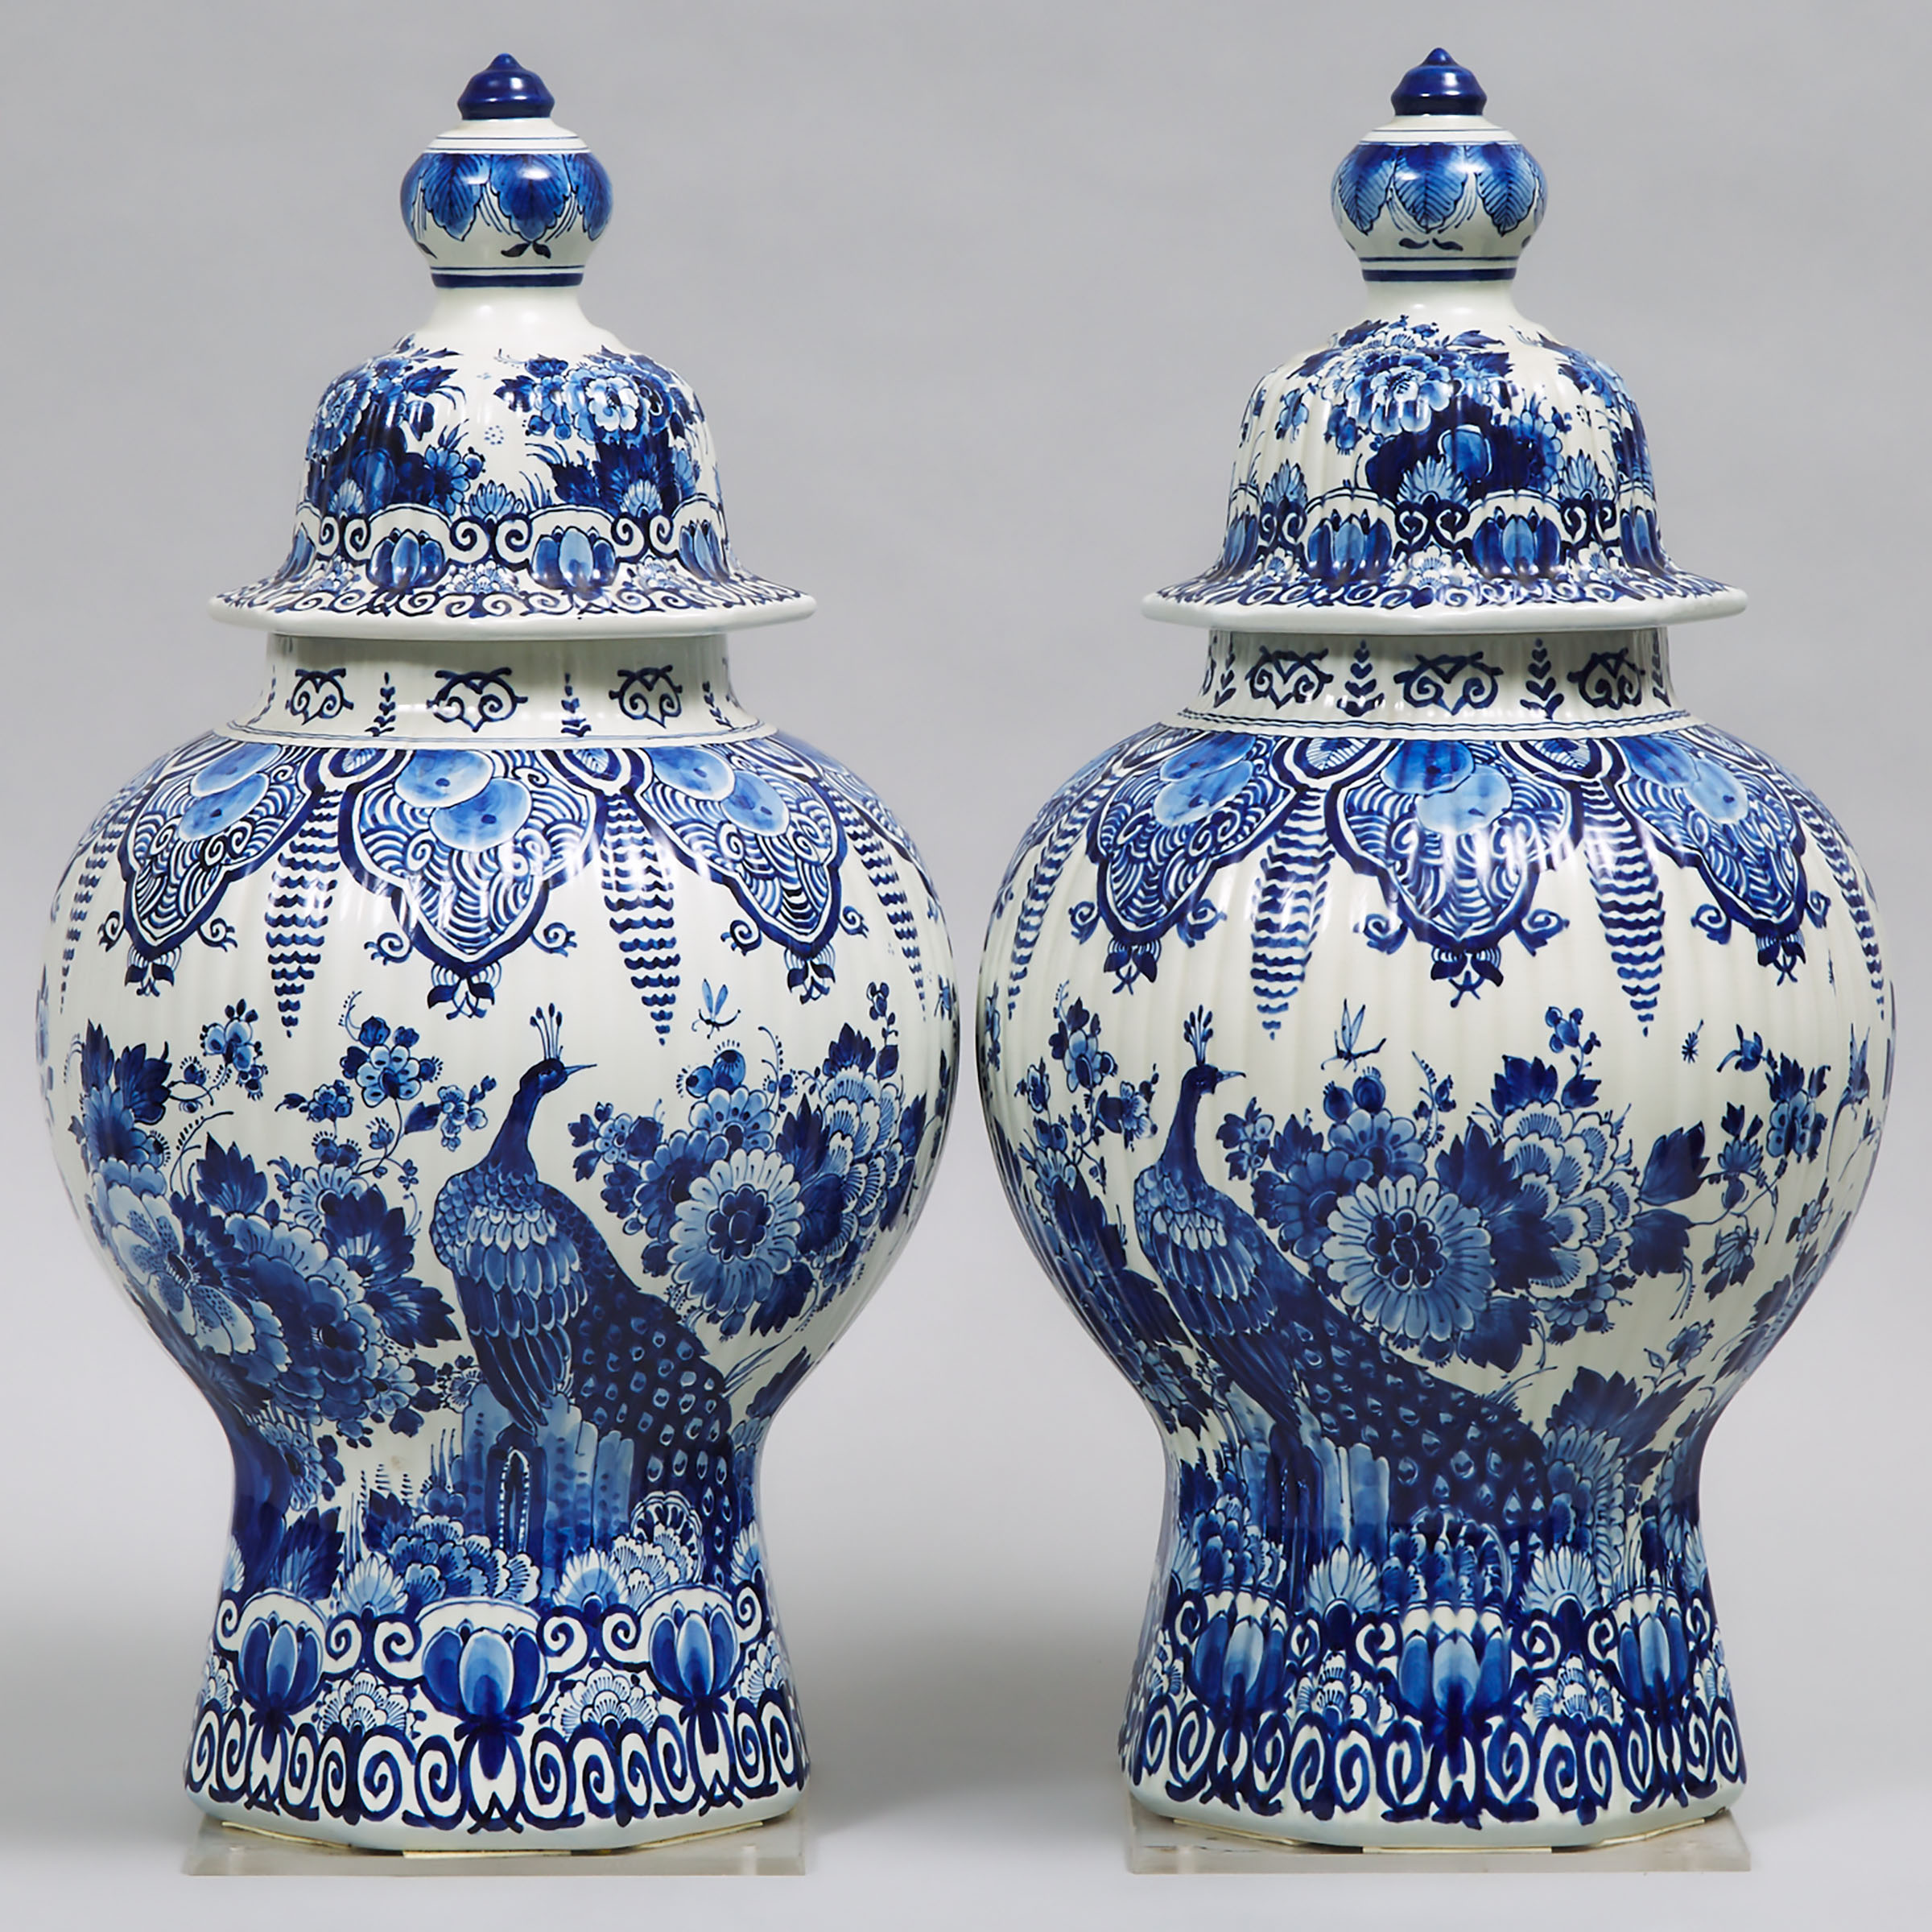 Pair of Delft Fluted Octagonal Baluster Covered Vases, 20th century